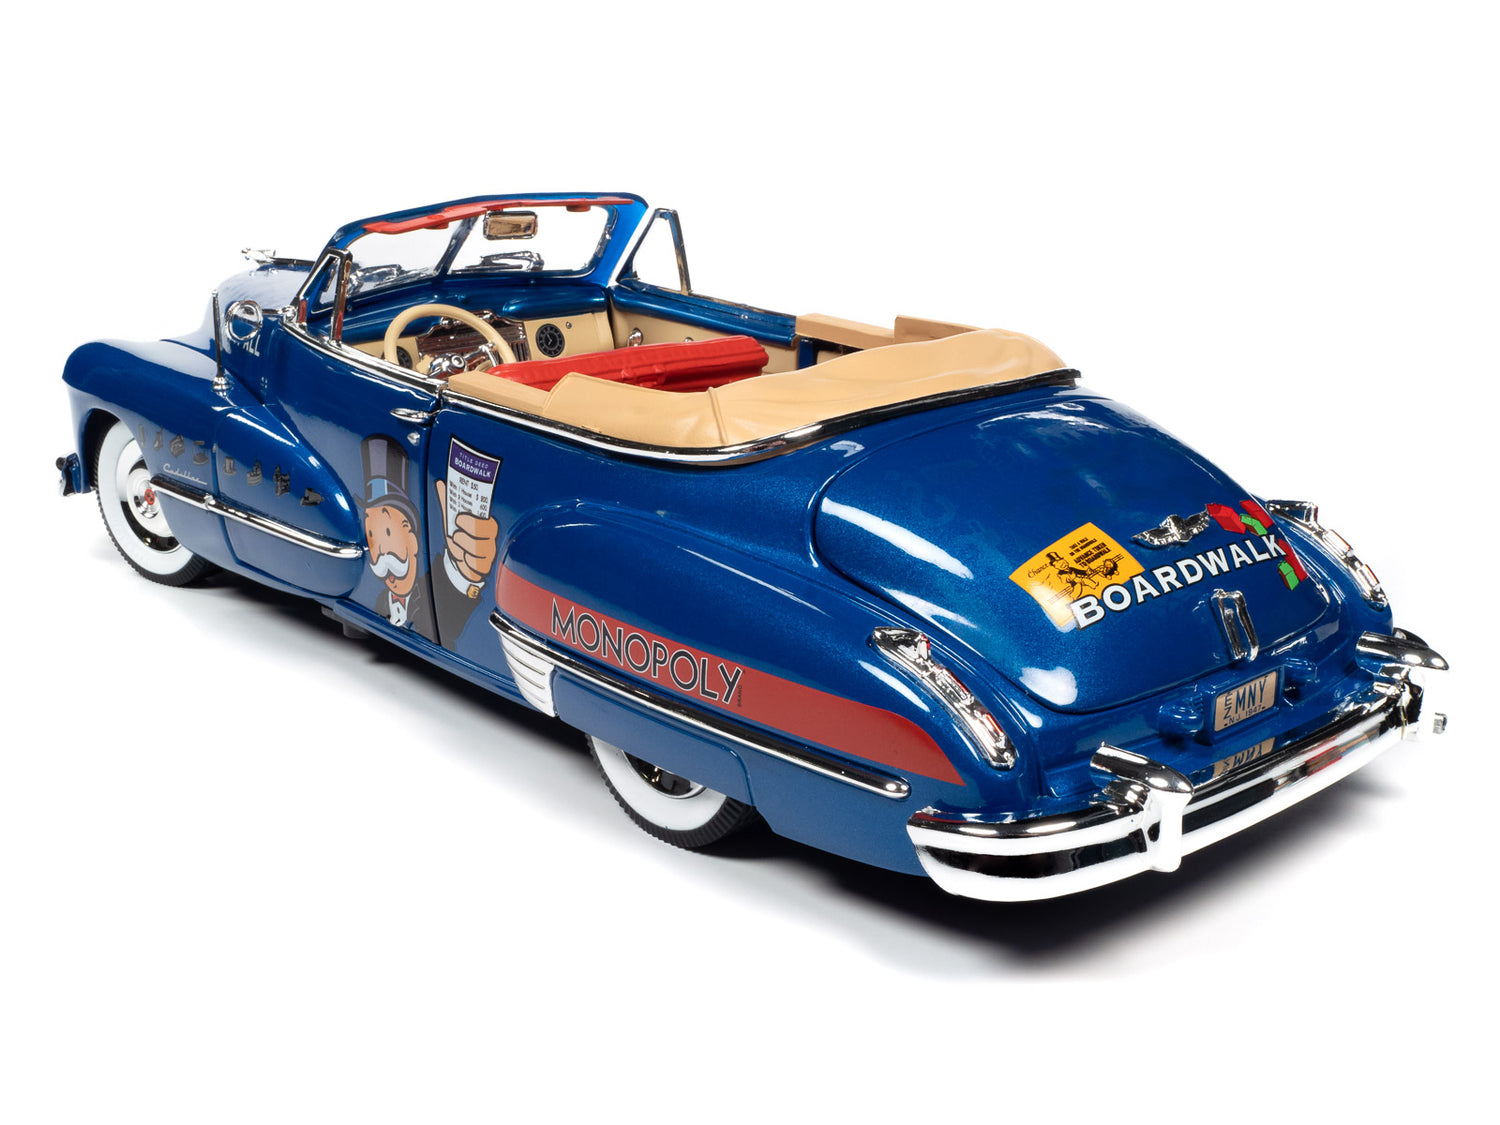 Auto World Monopoly 1947 Cadillac Convertible w/Resin Figure 1:18 Scale Diecast